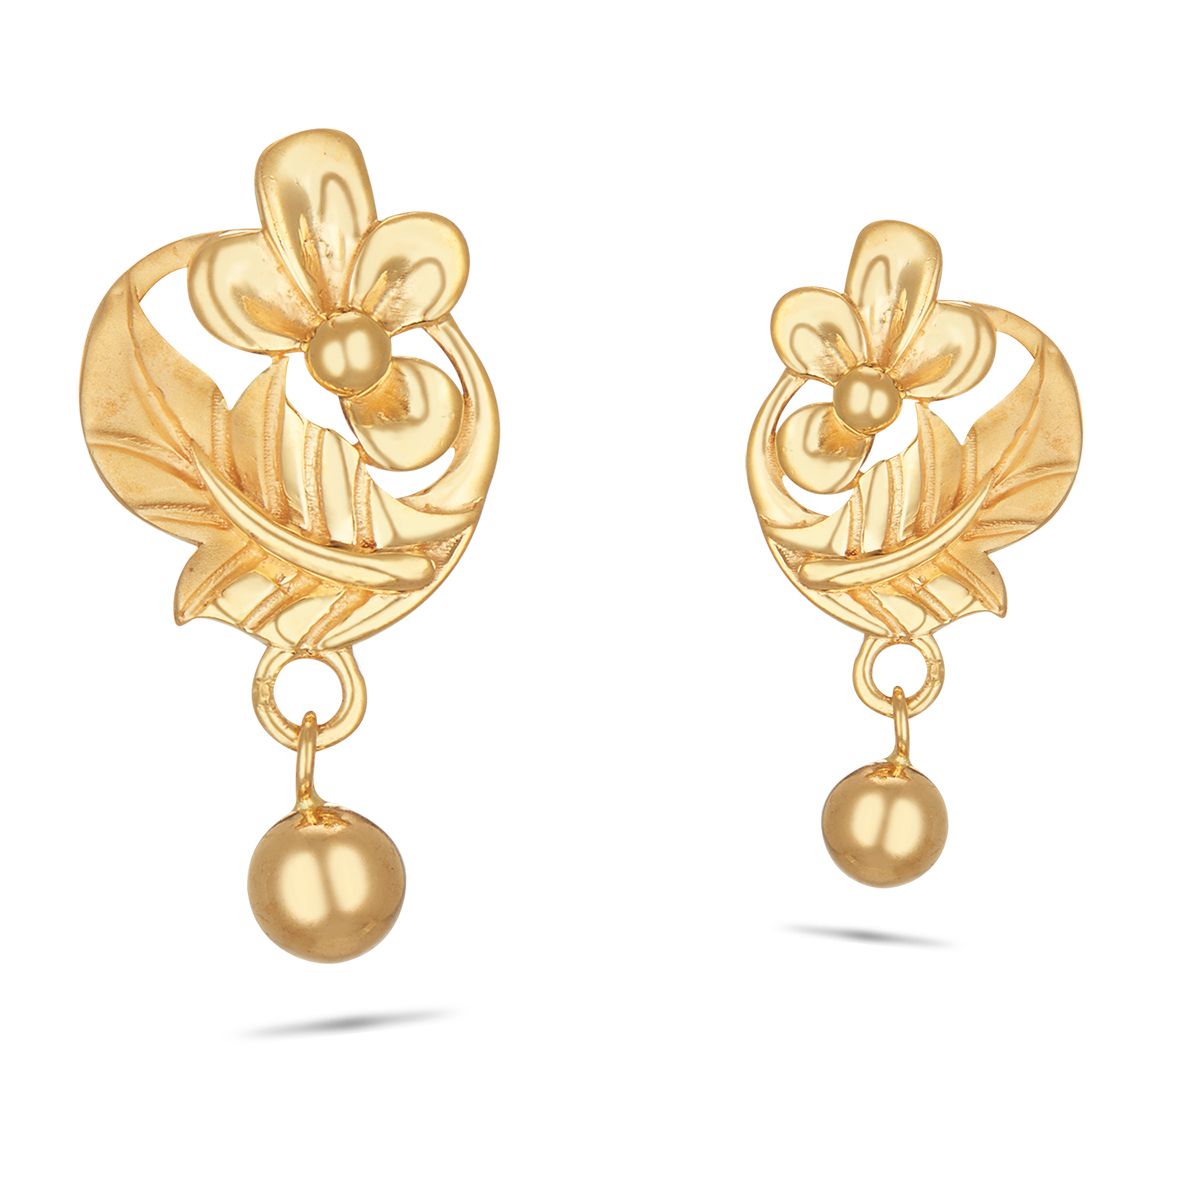 Latest Light weight Gold Earring Design with weight and price - YouTube